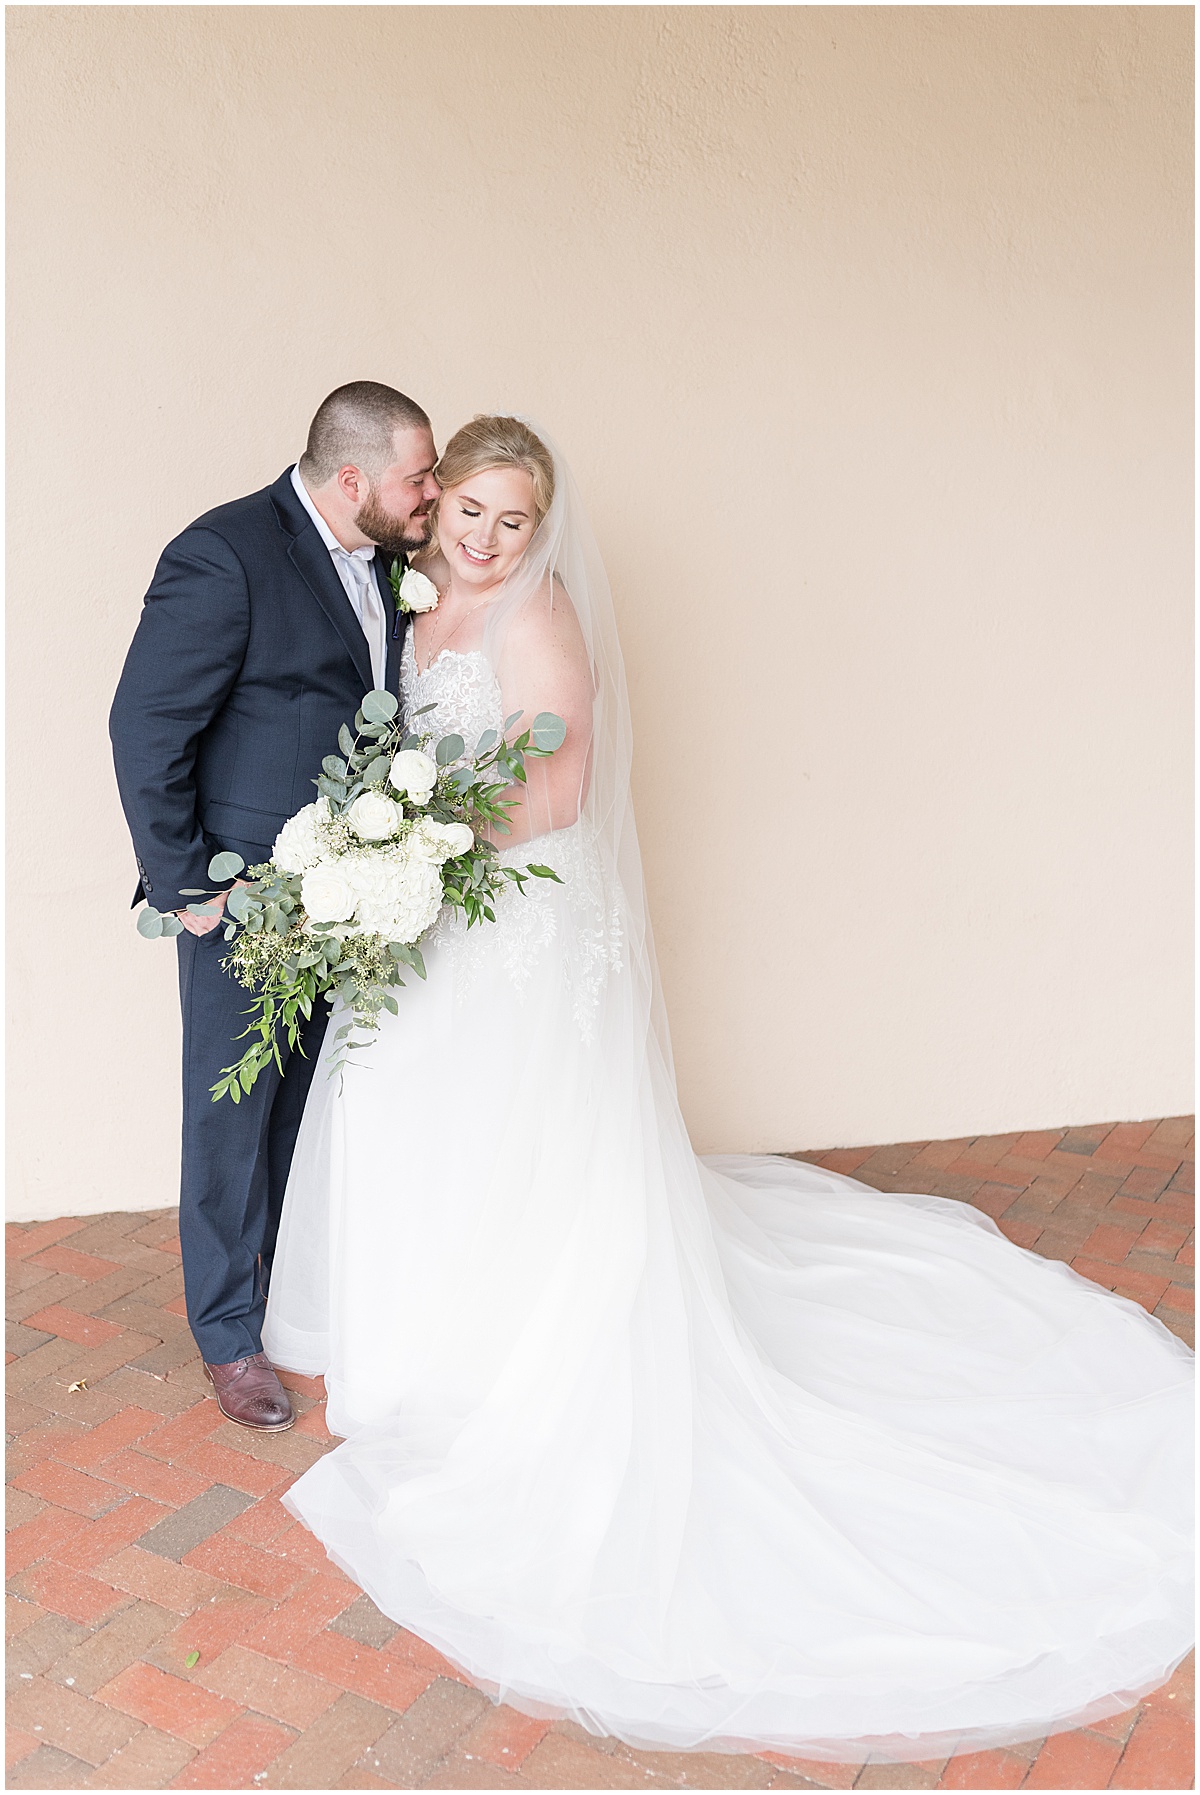 Bride and groom photos at Fowler House Mansion wedding in Lafayette, Indiana by Victoria Rayburn Photography